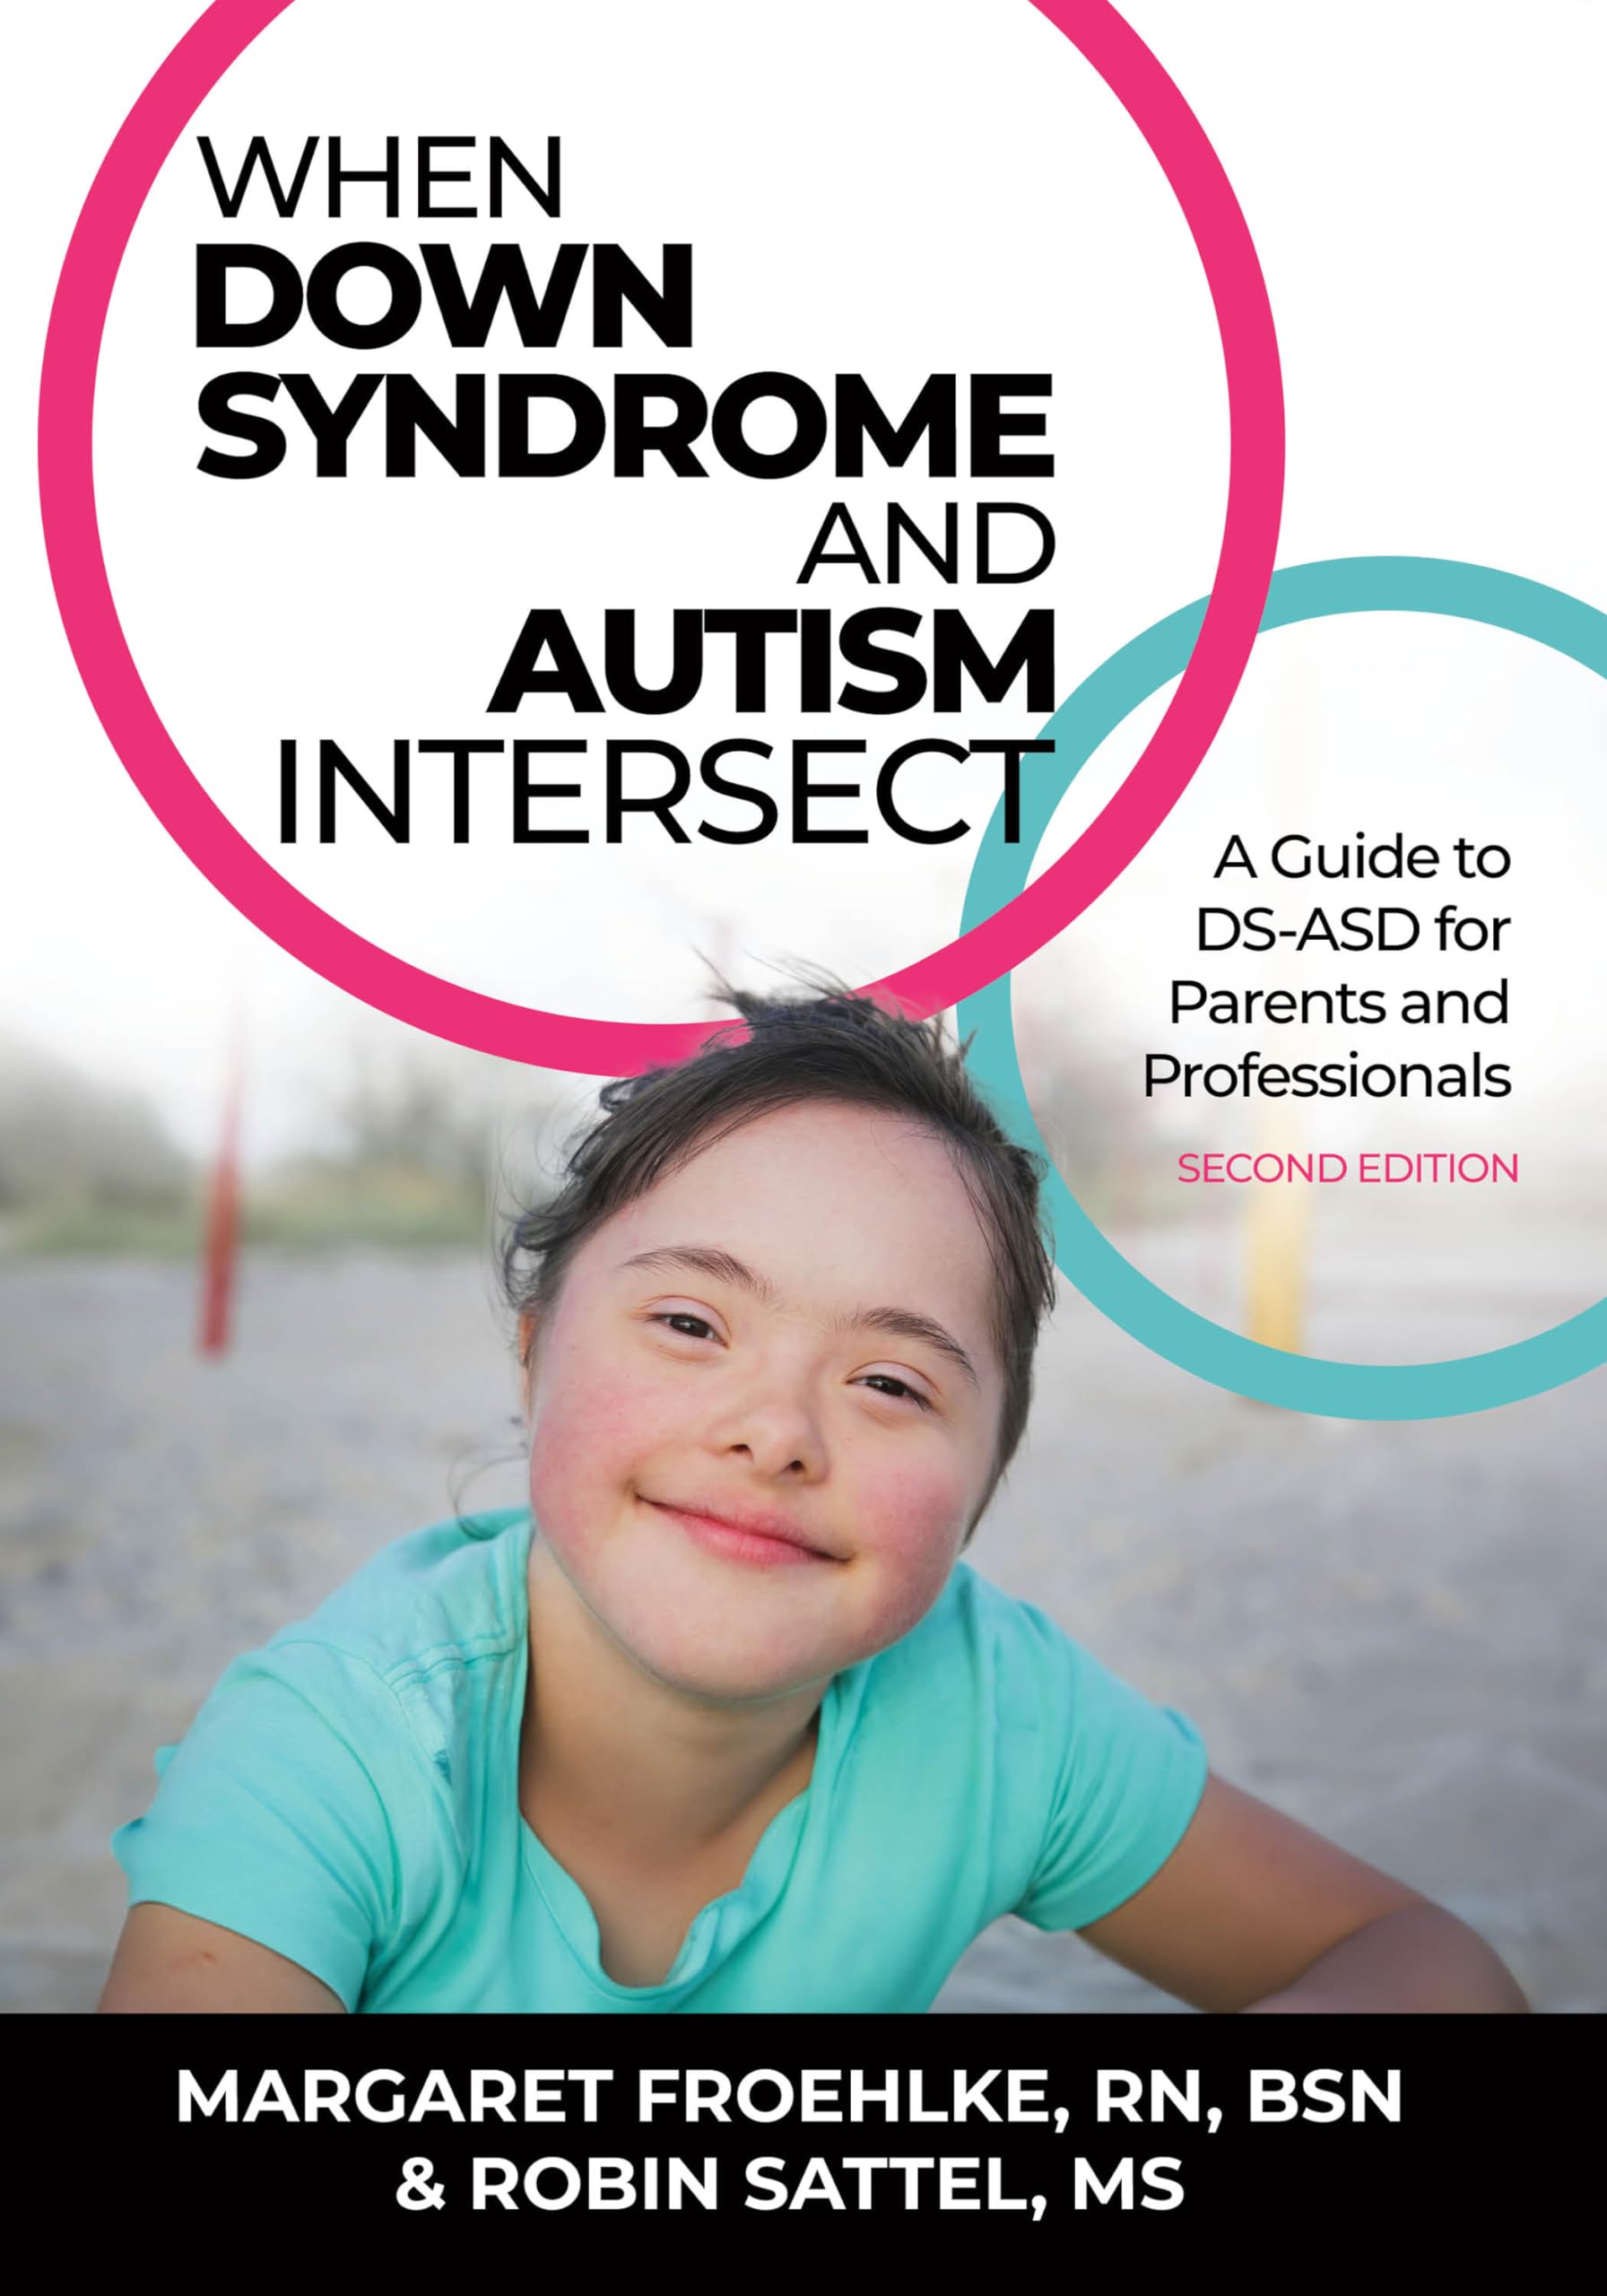 When Down Syndrome and Autism Intersect: A Guide to DS-ASD for Parents and Professionals (2nd Edition)